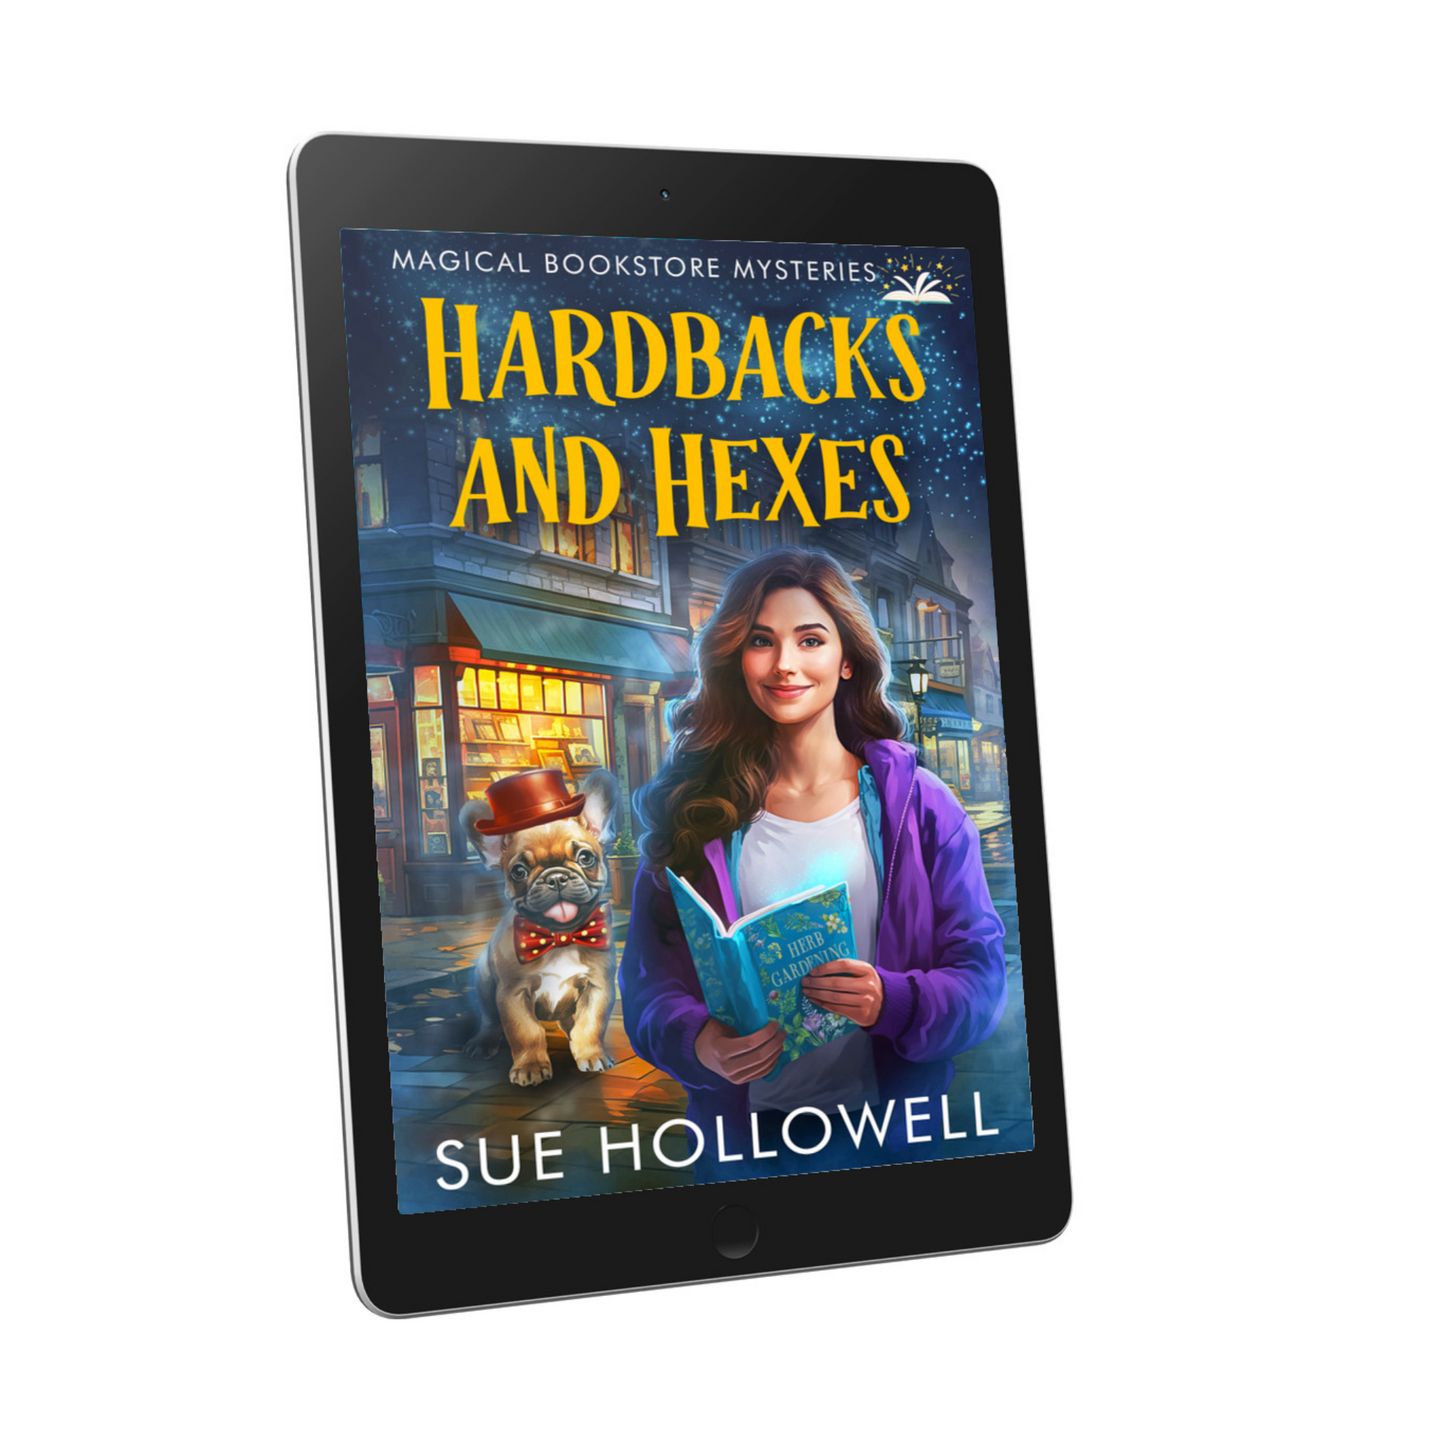 Hardbacks and Hexes Magical Bookstore cozy mystery